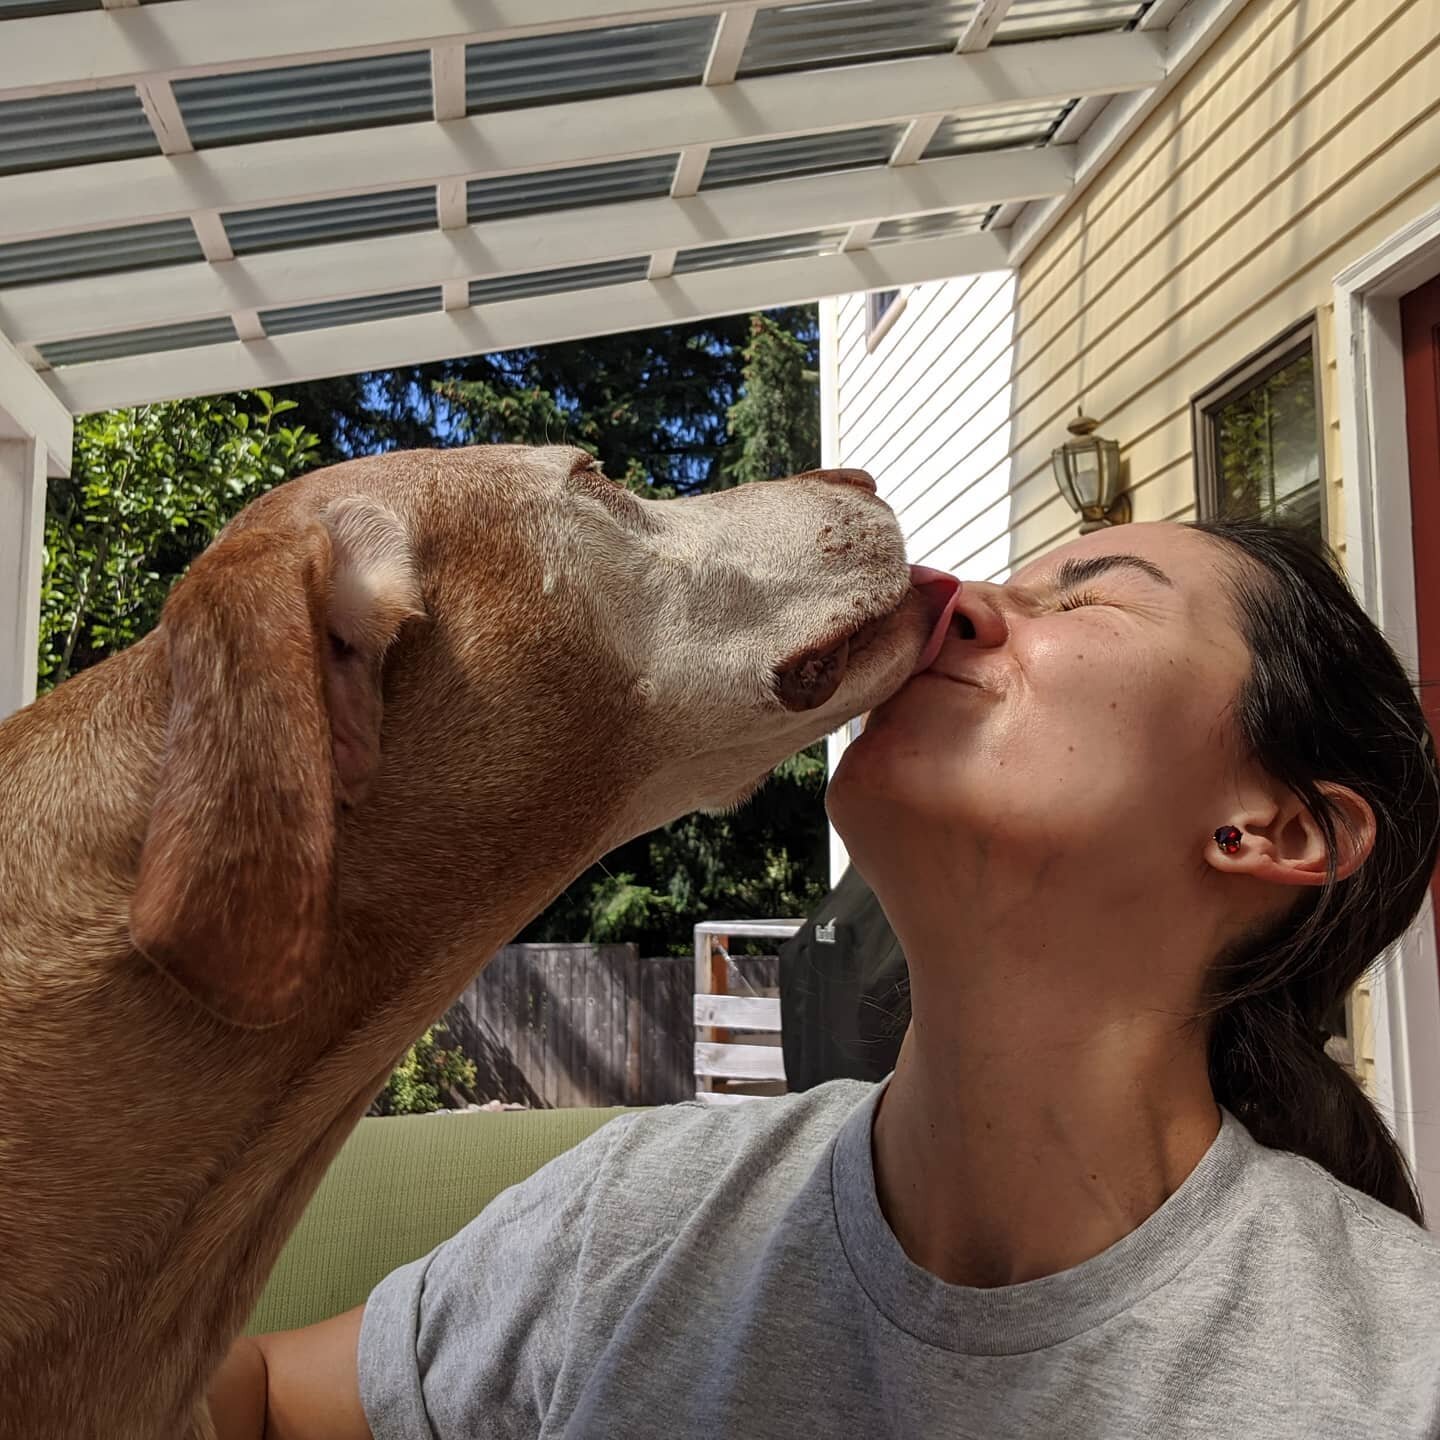 When you haven't seen Camble in a while, he makes sure to catch you up on all the kisses you've missed out on. 😚😆 #onthenose #andonthechin #anndontheeyeball
・
@camble.vizsla @jadelibero #rosie_walks